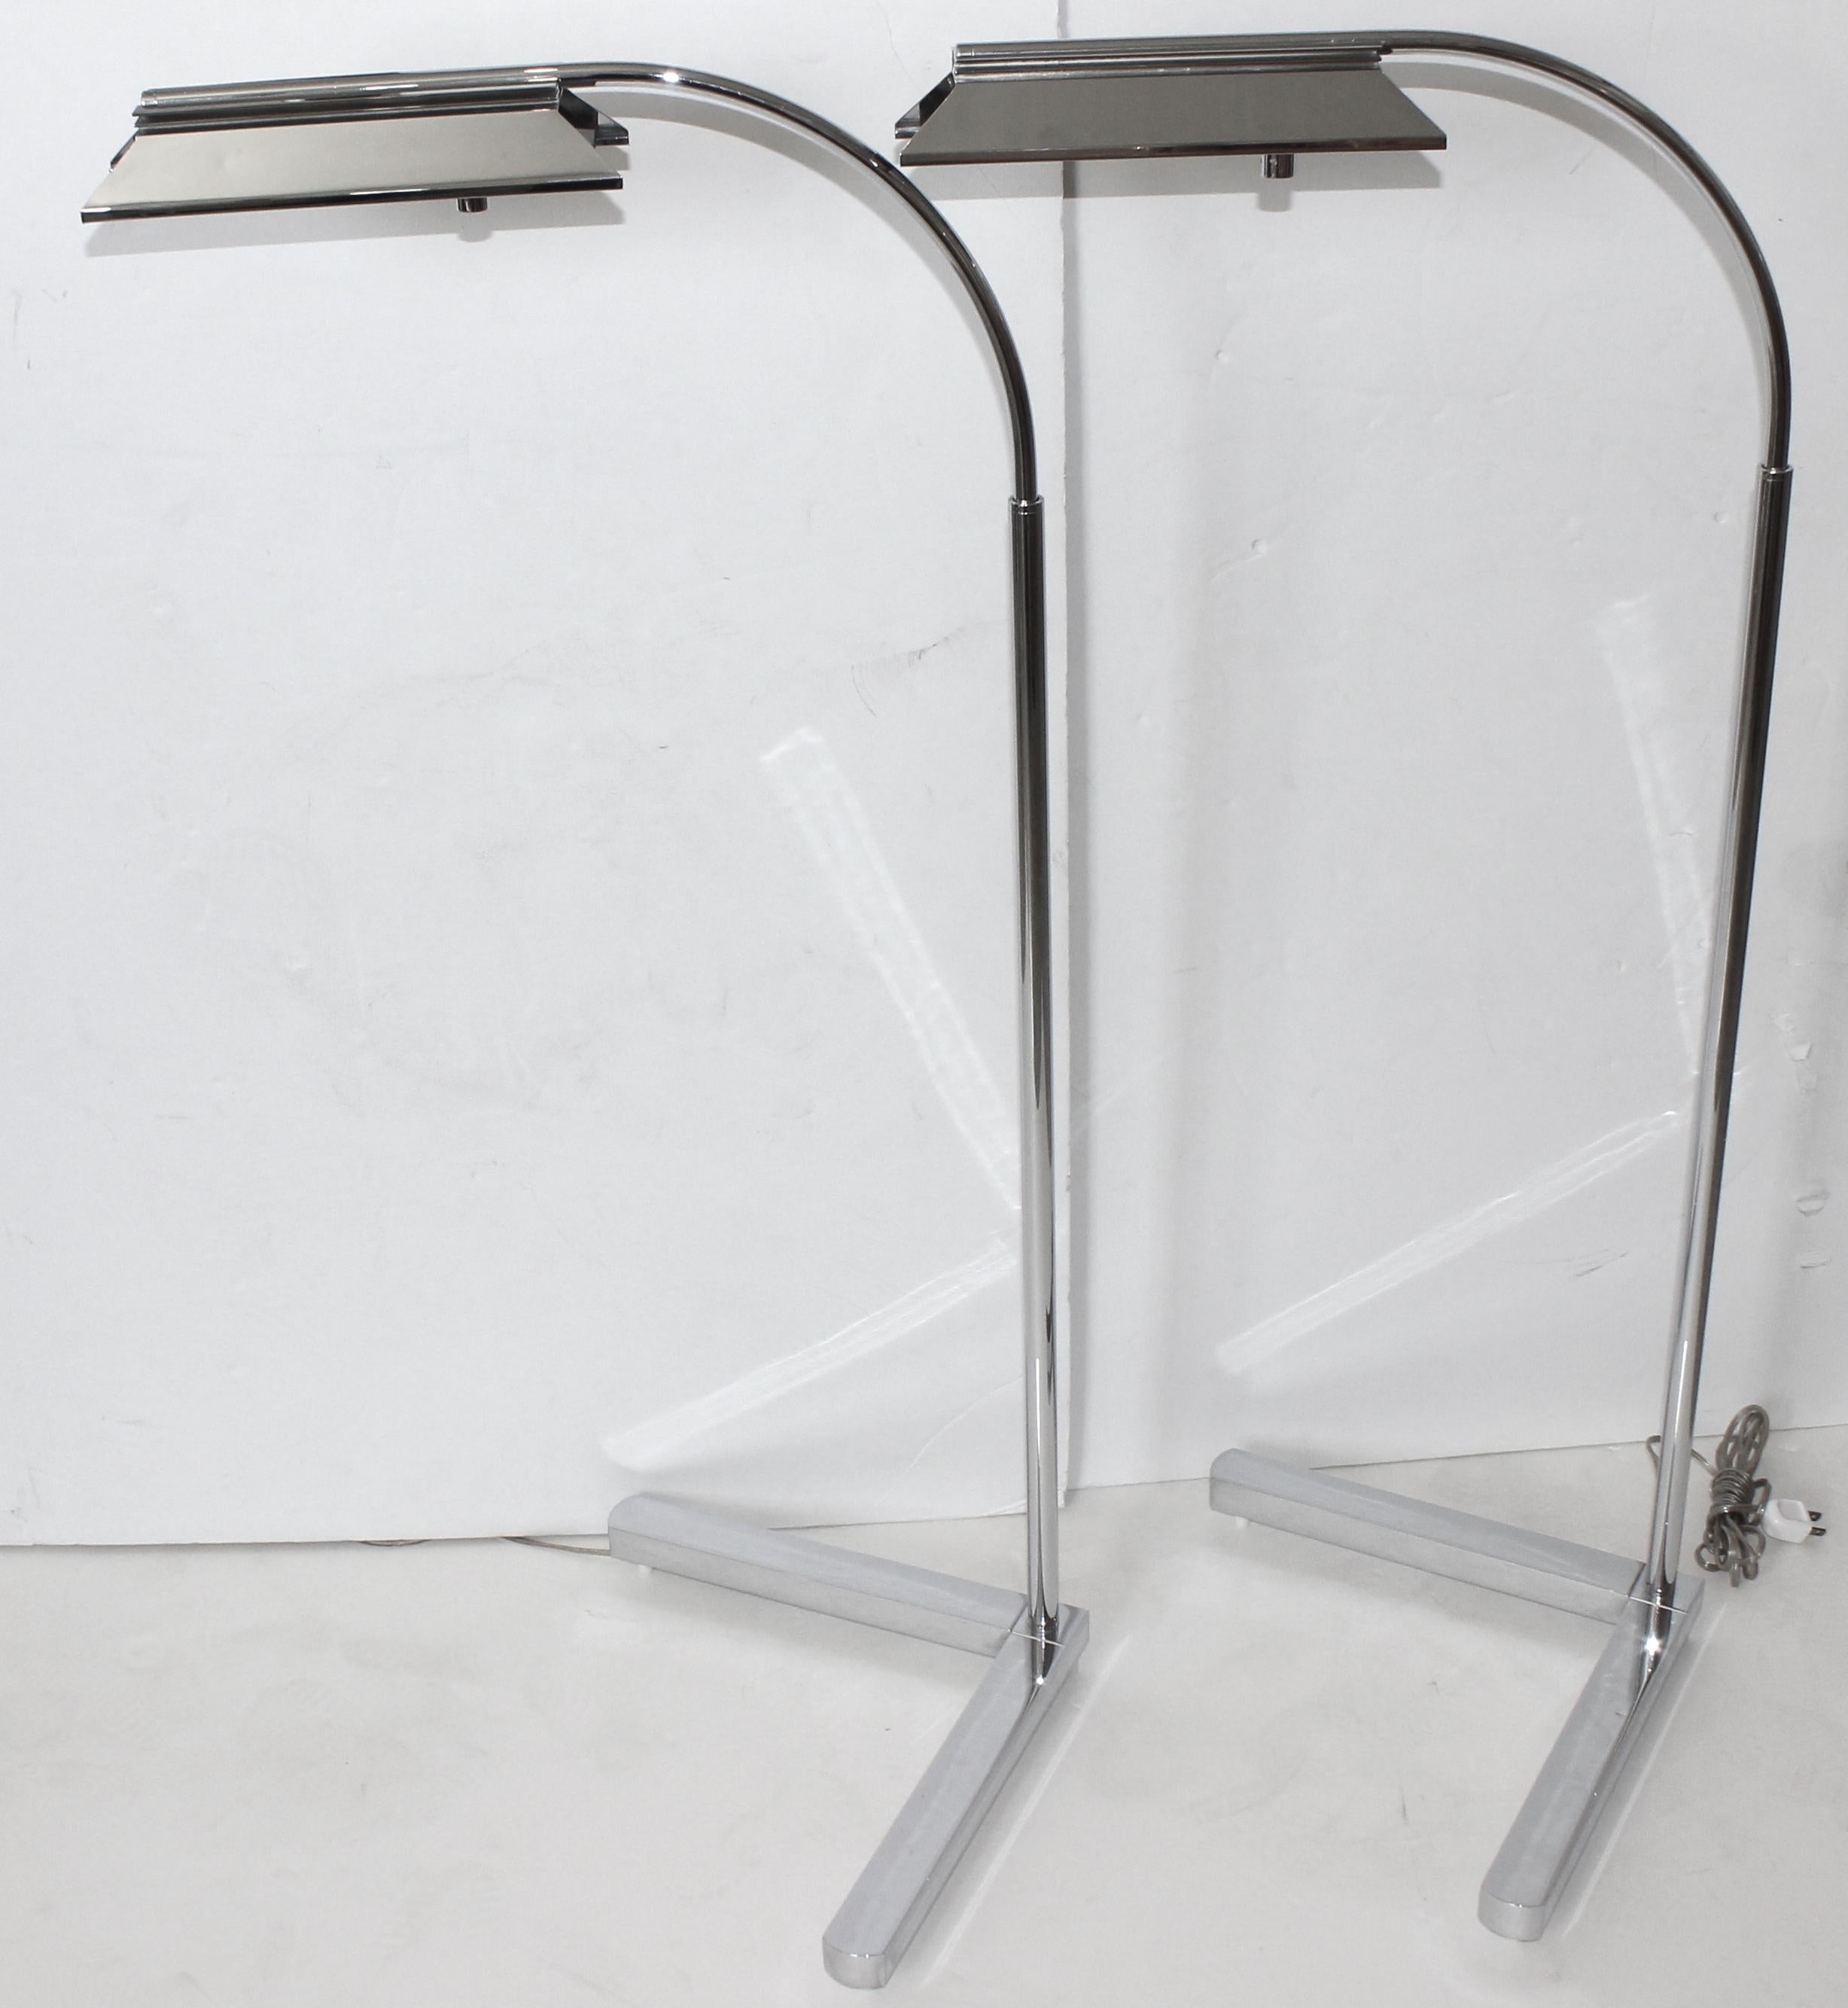 20th Century Pair of Casella Nickel Plated Adjustable Floor Lamps For Sale